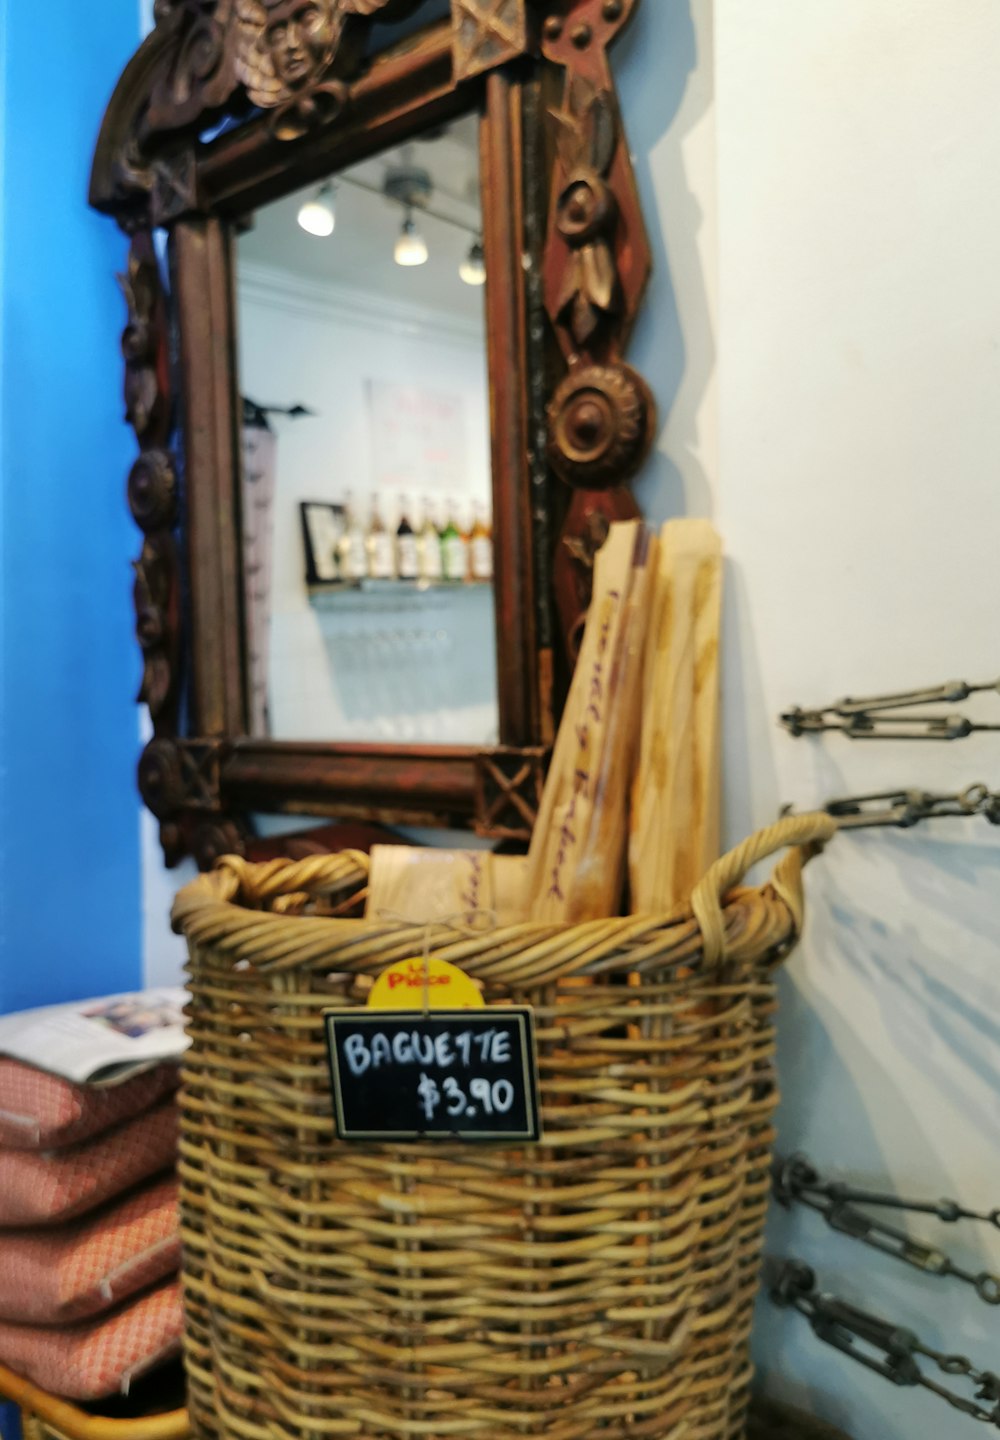 a basket with a sign on it sitting in front of a mirror